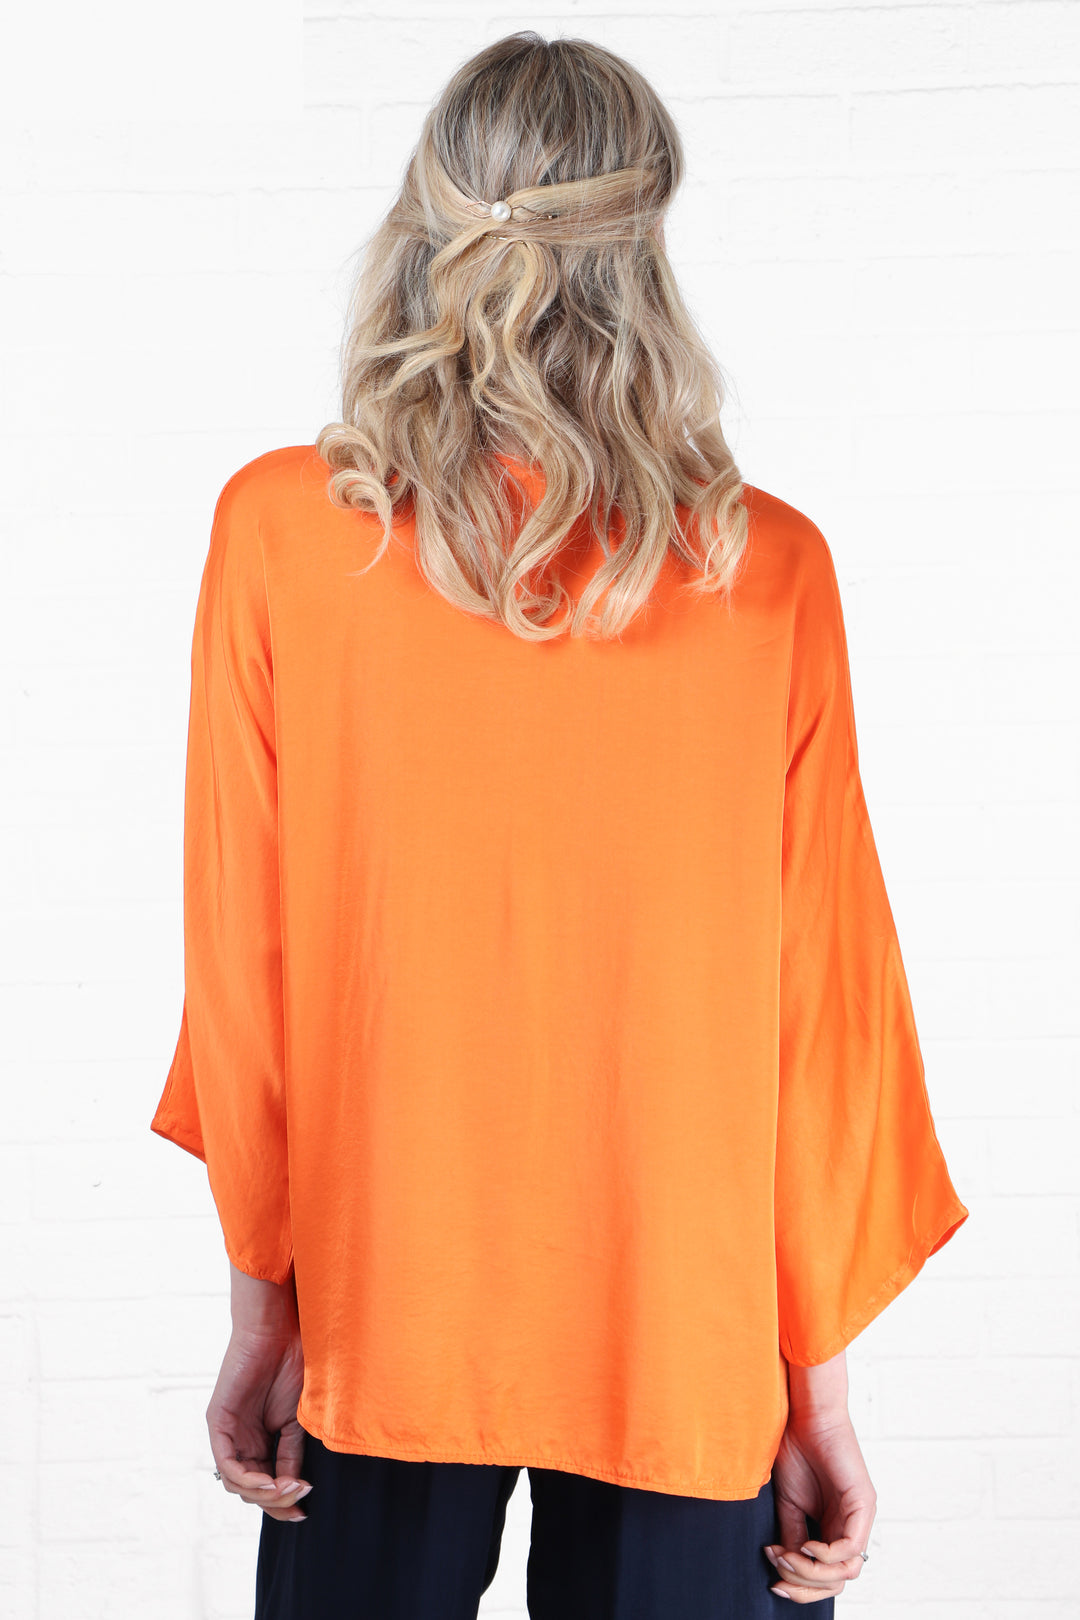 model showing the back of the blouse, showing an all over solid orange colour to the blouse